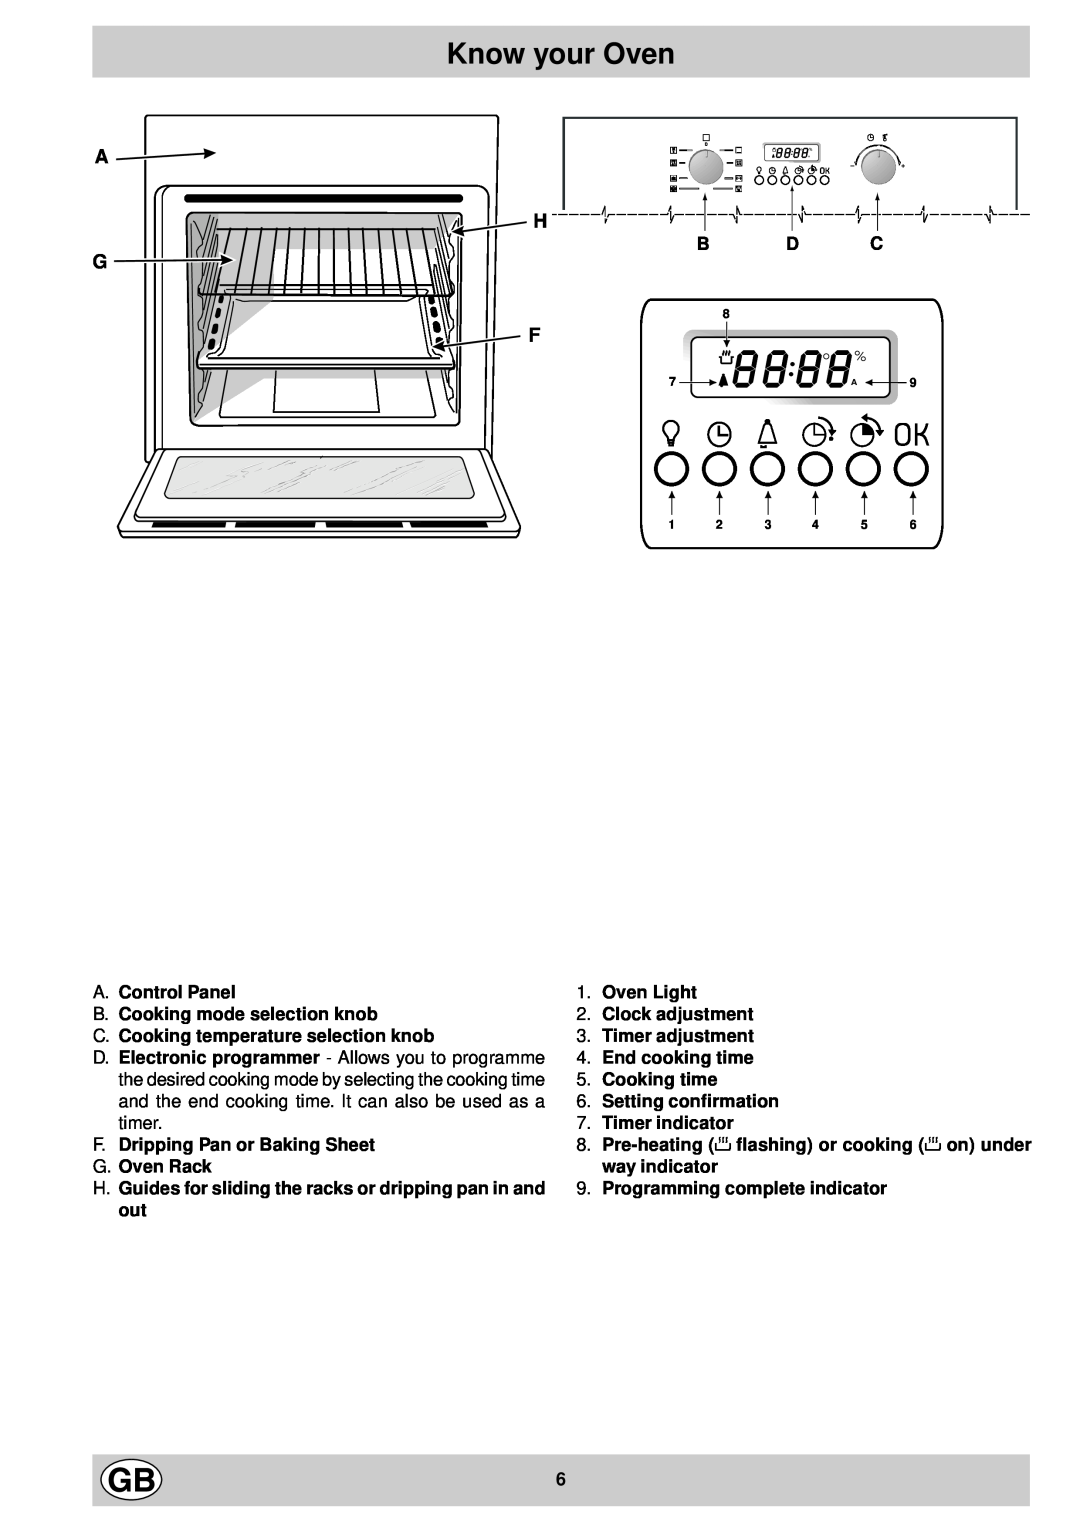 Hotpoint ST87EX Know your Oven, A H G F, A.Control Panel B.Cooking mode selection knob, Oven Light 2.Clock adjustment 